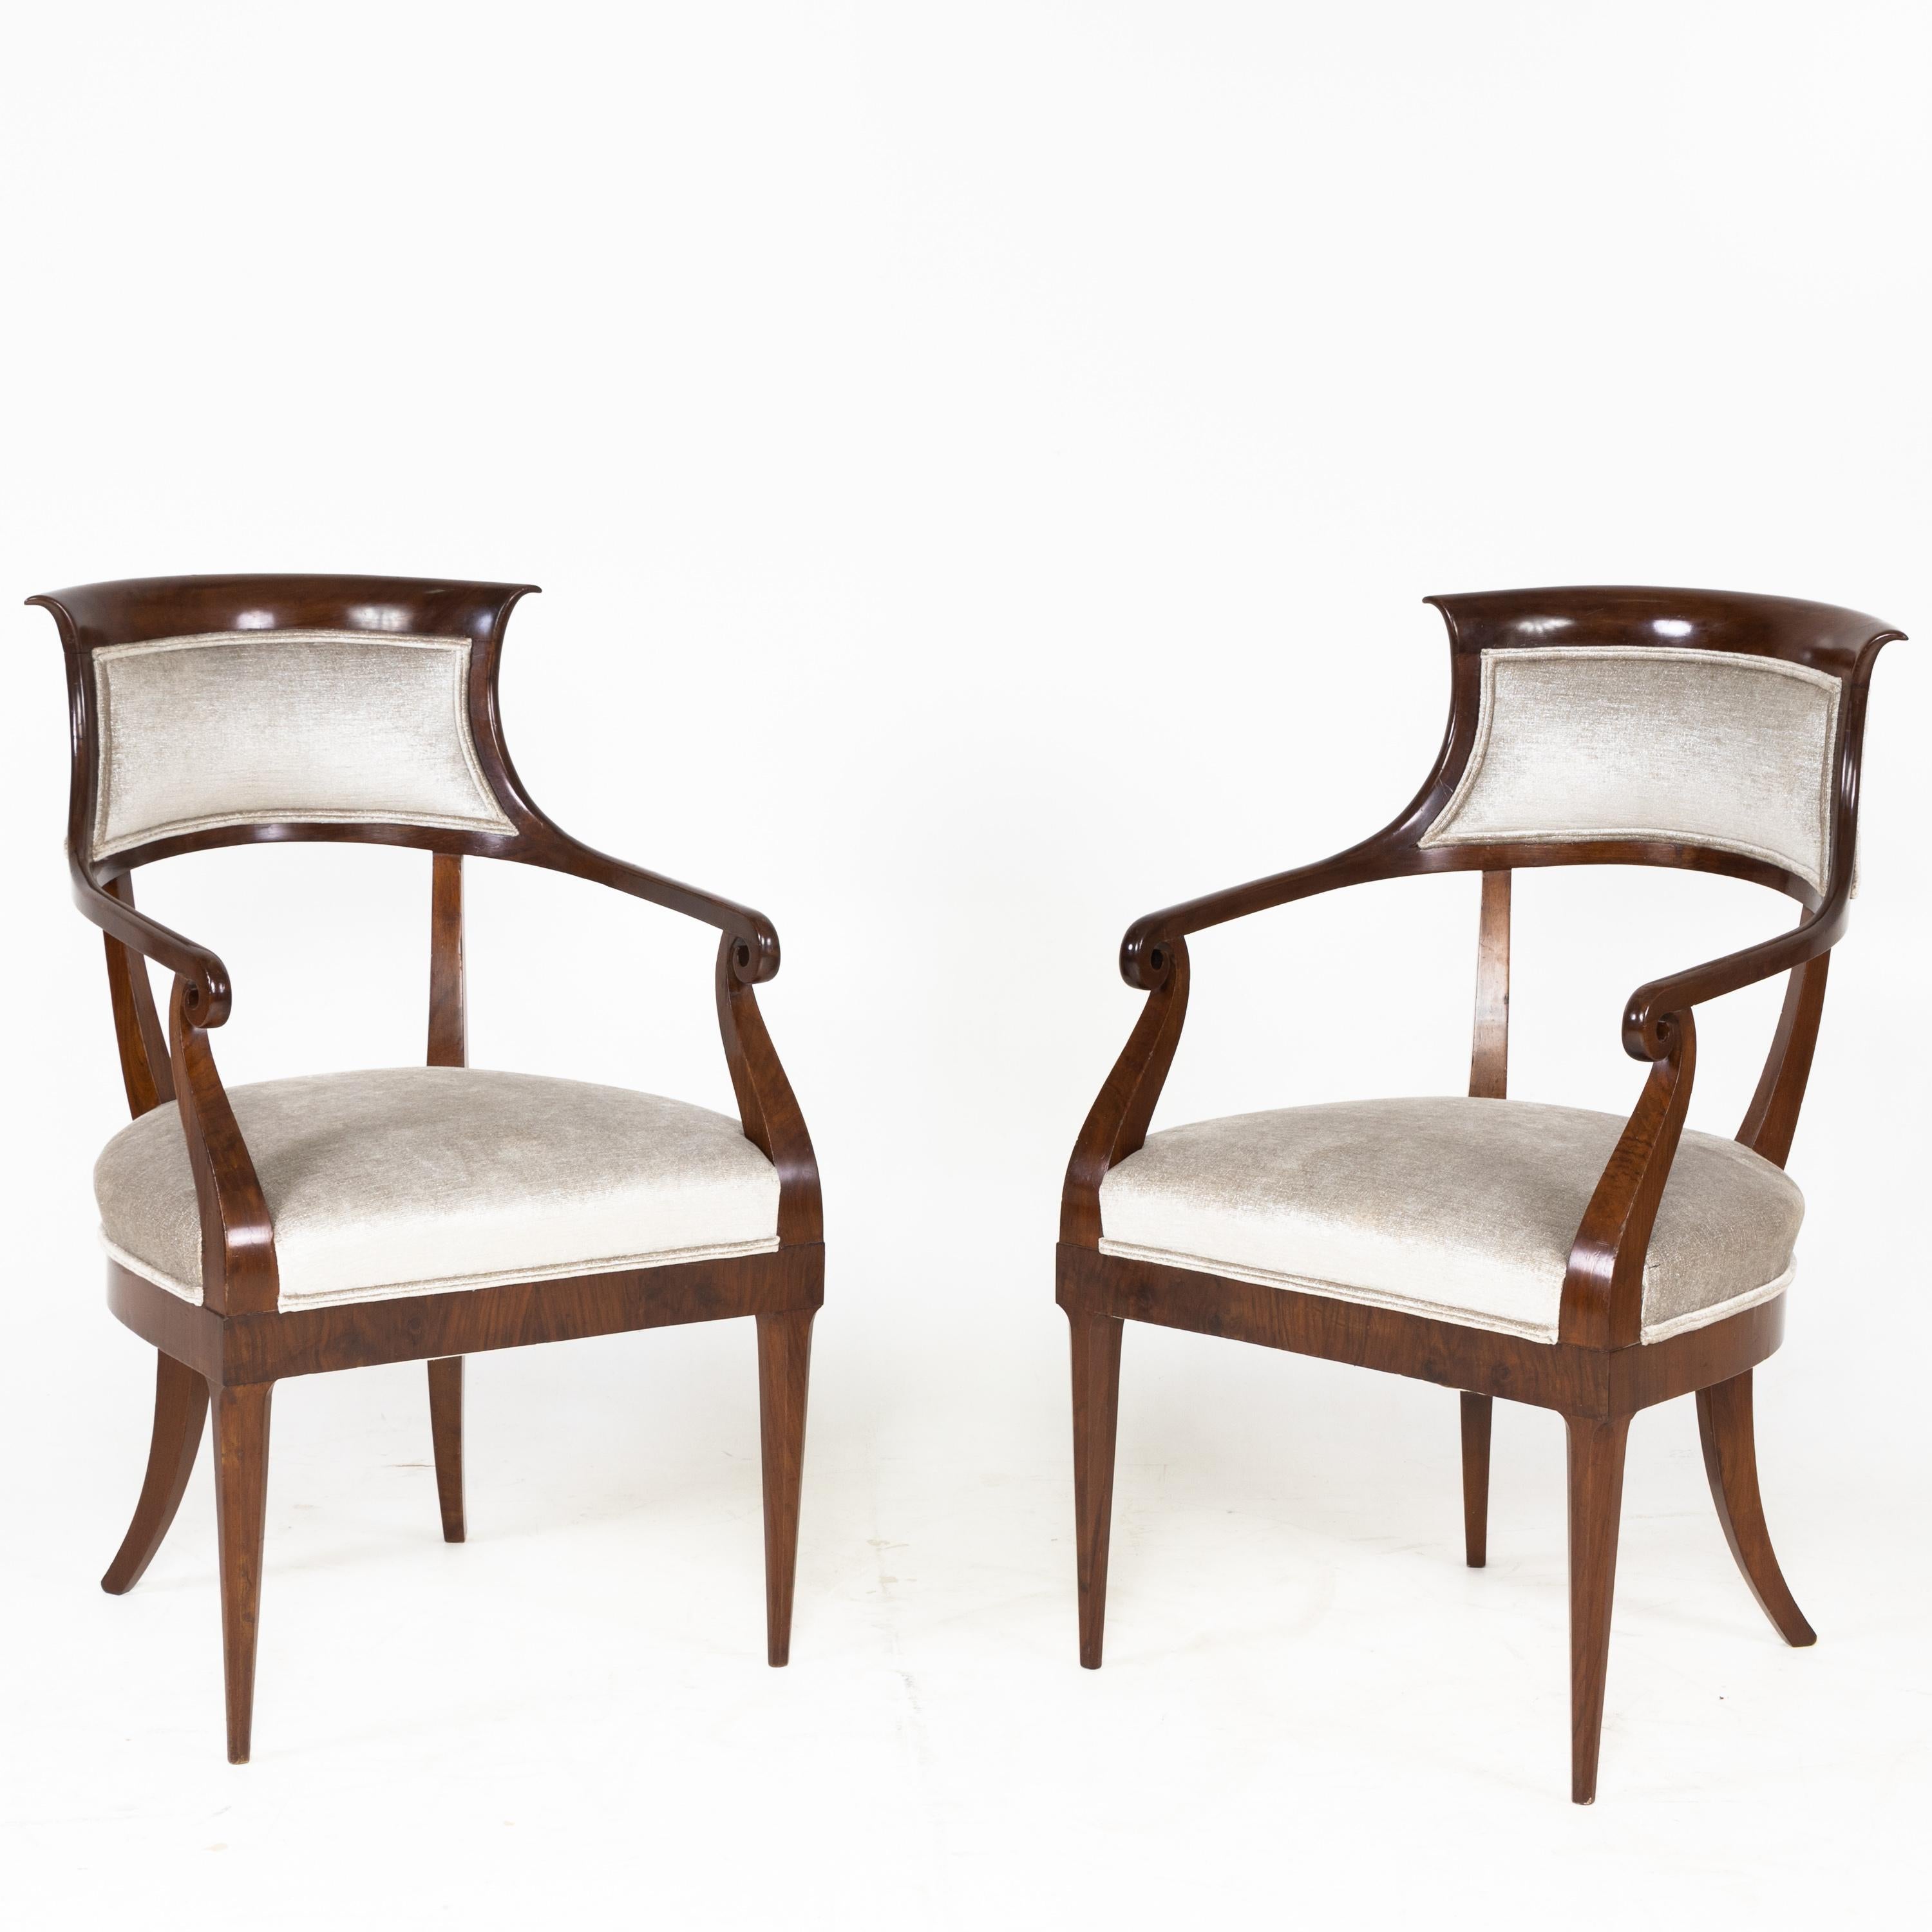 Pair of Italian Mahogany armchairs standing on octagonal pointed legs in front and sabre legs in the back. The backrest with retracted sides and flared edge merges into the volute-shaped armrests. The straight frame ends flush with the curved